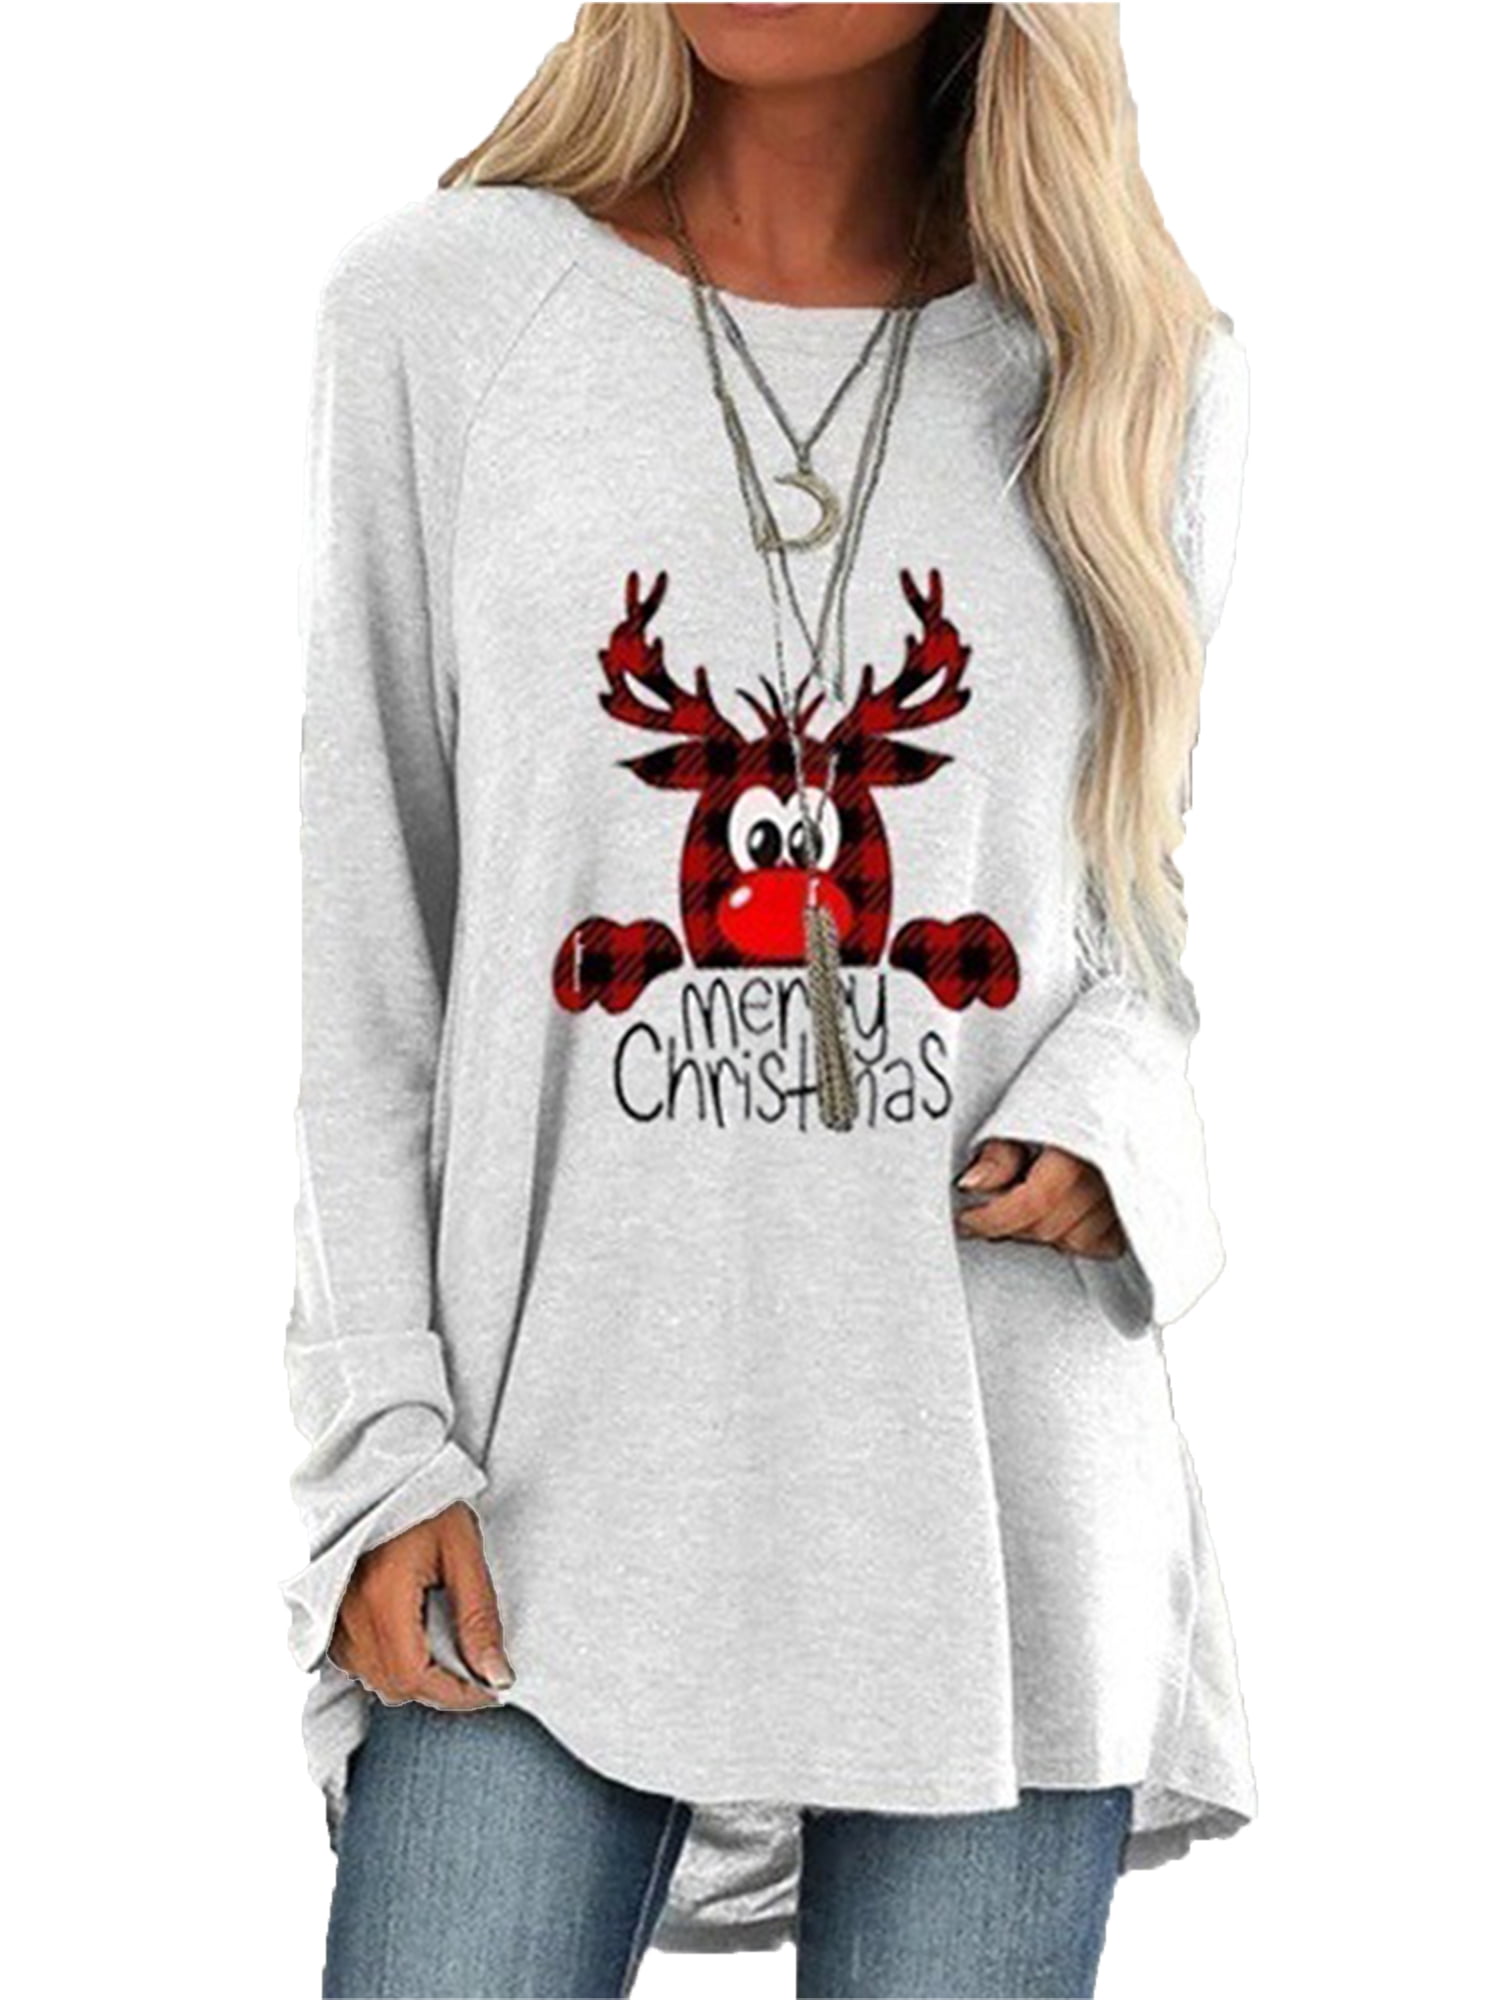 Graphic Tees for Women Vintage Plus Size Christmas Long Sleeve T-Shirts Round Neck Splicing Plaid Sweatshirt